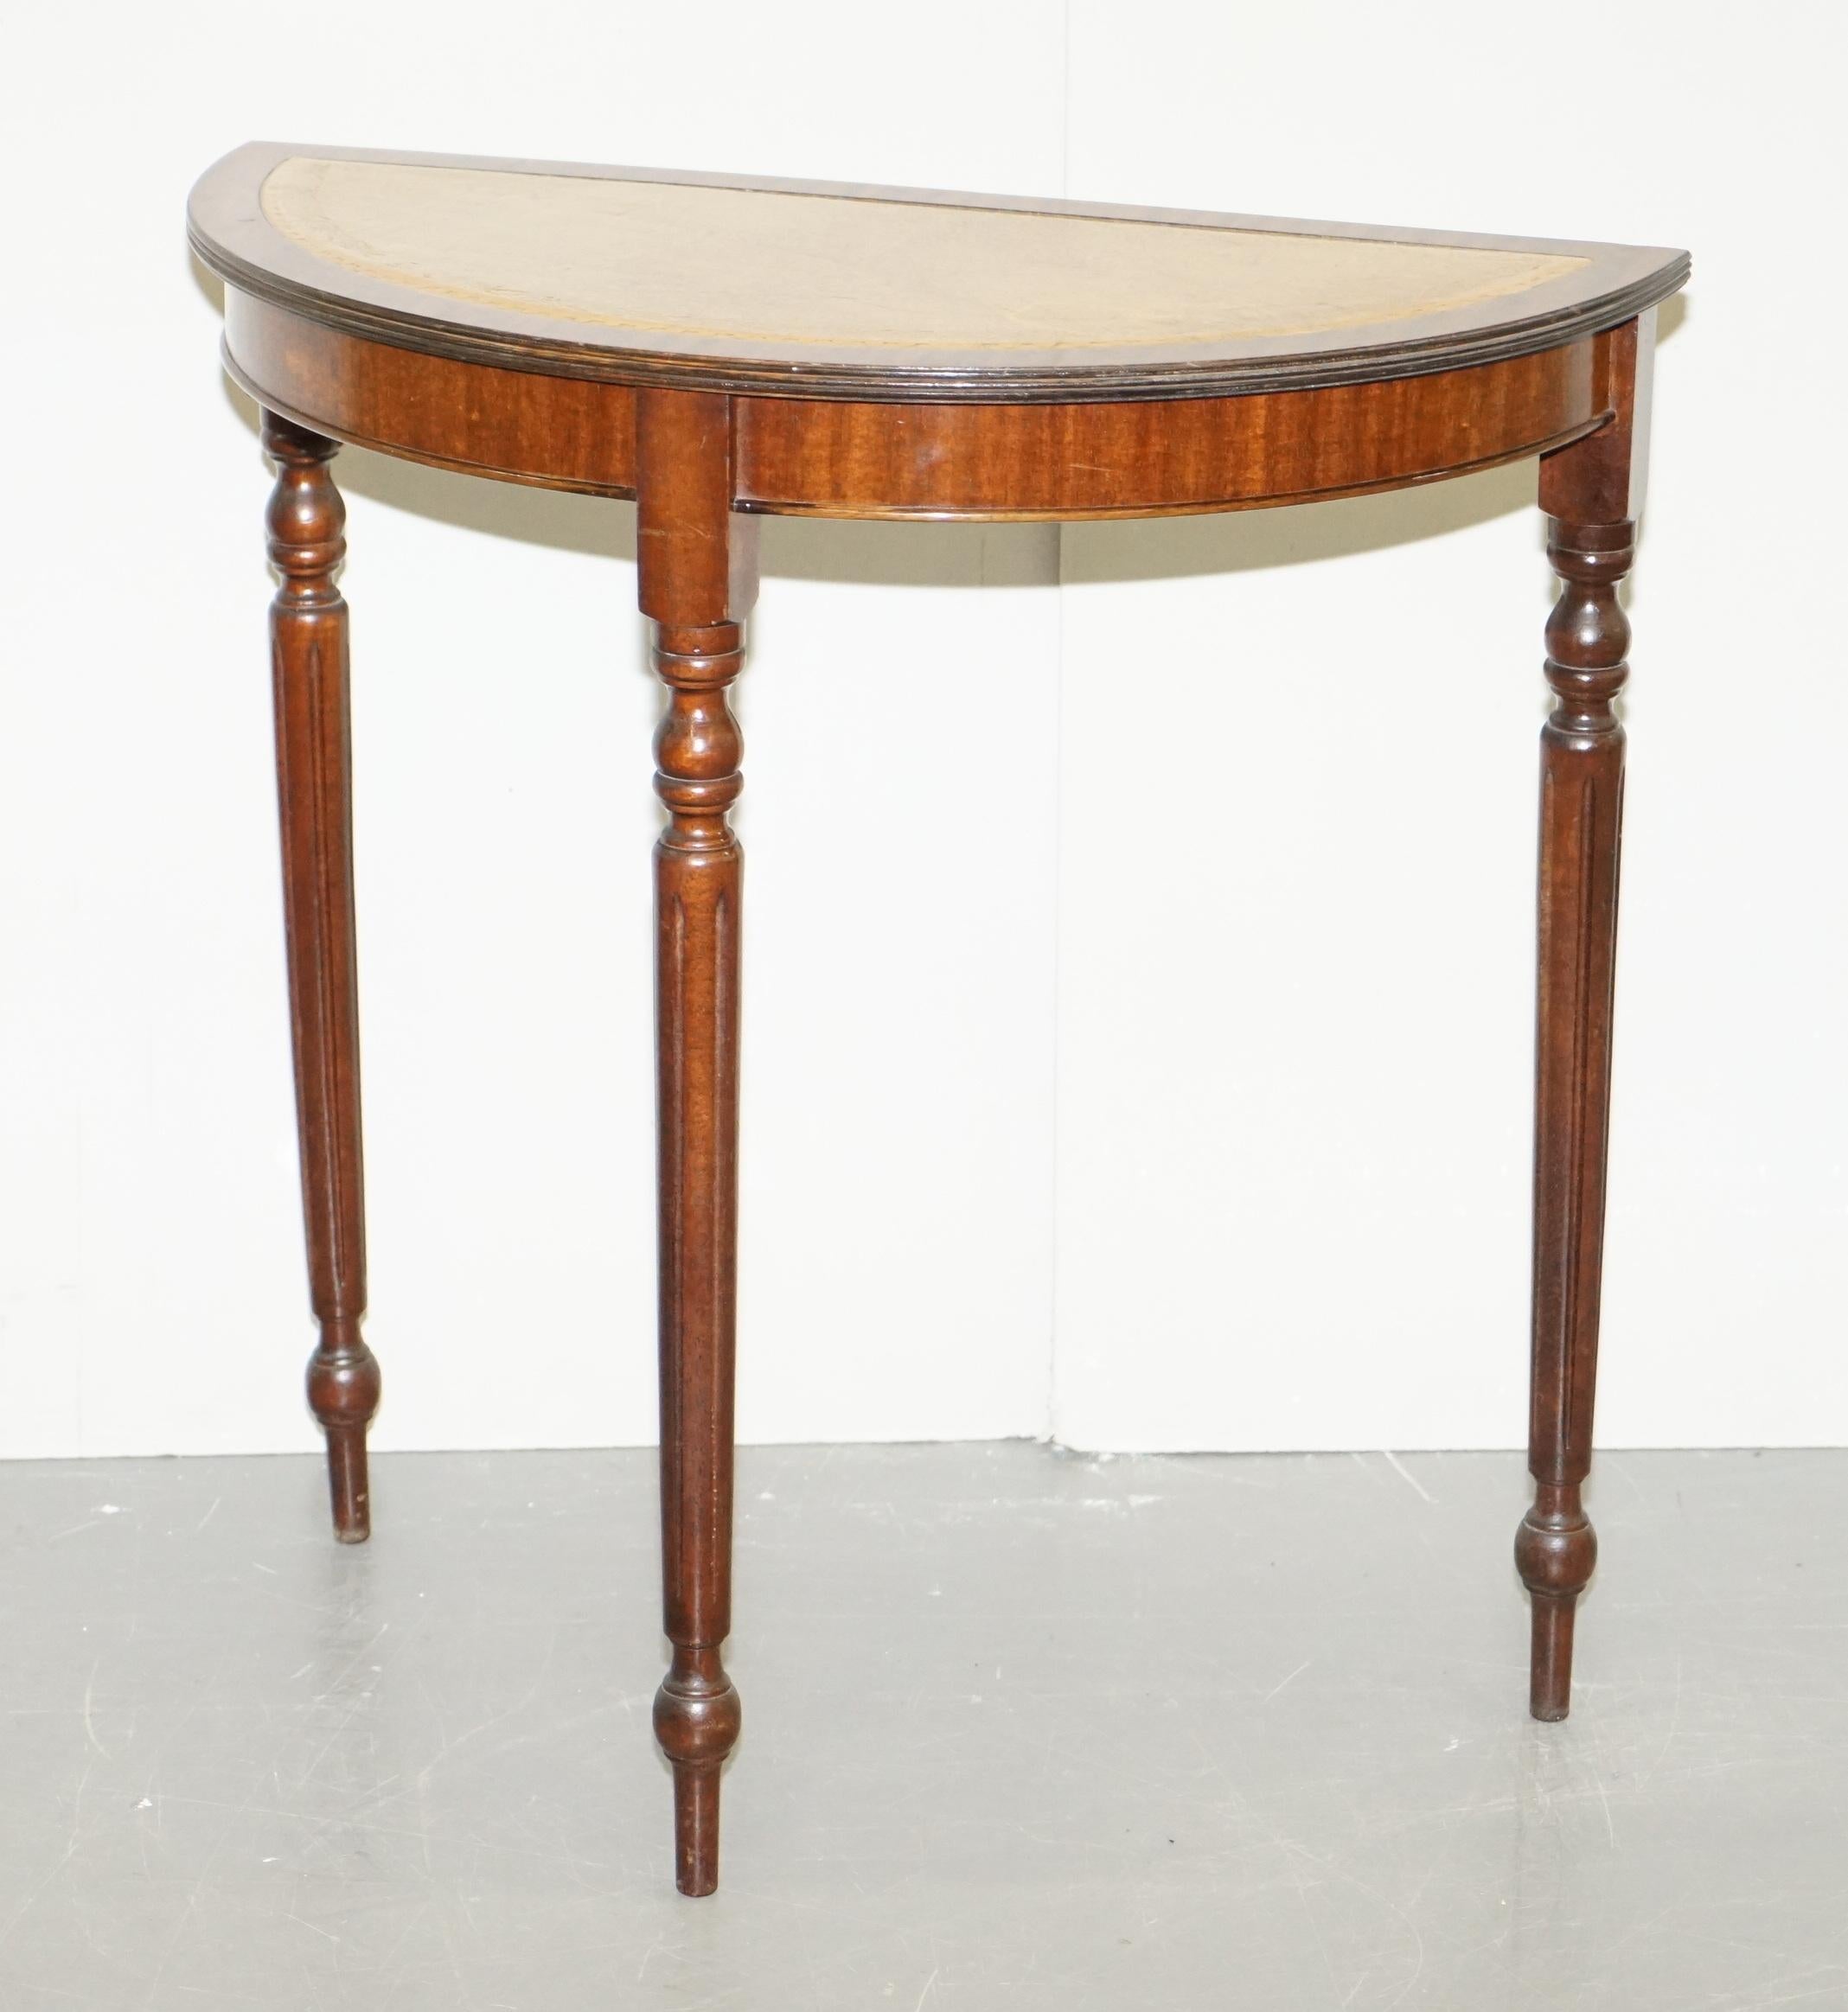 Art Deco Vintage Flamed Mahogany with a Tan Brown Leather Top Demilune Console Table